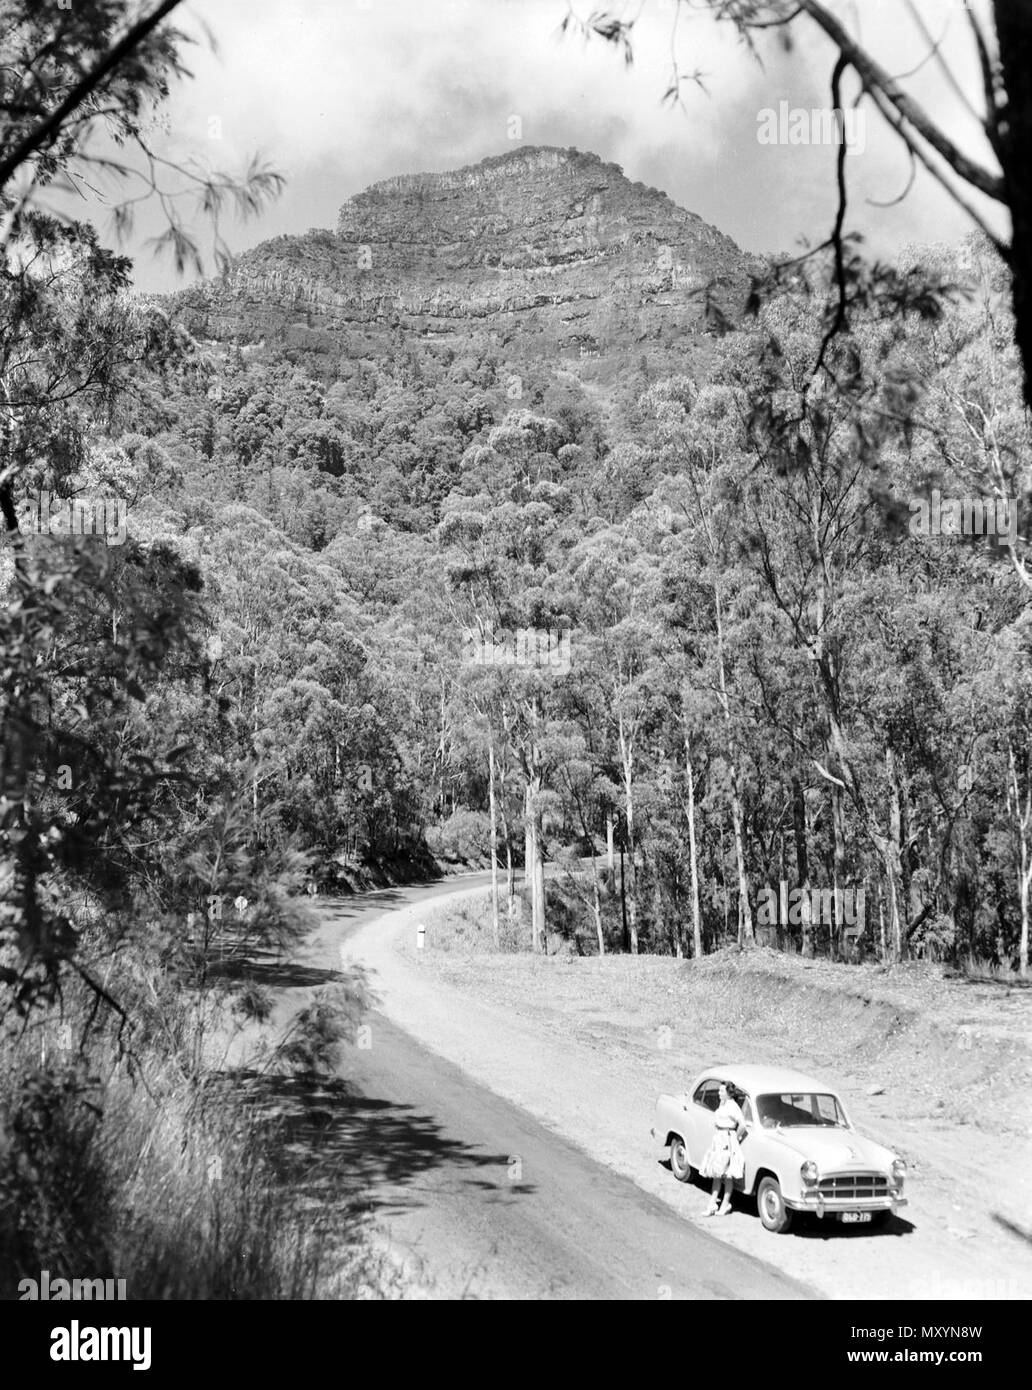 Mount Cordeaux, Cunninghams Gap, 1961. Also known as Niamboyoo, Mount Cordeaux was named by botanist Allan Cunningham after William Cordeaux, the assistant to Surveyor-General Sir Thomas Mitchell. Stock Photo